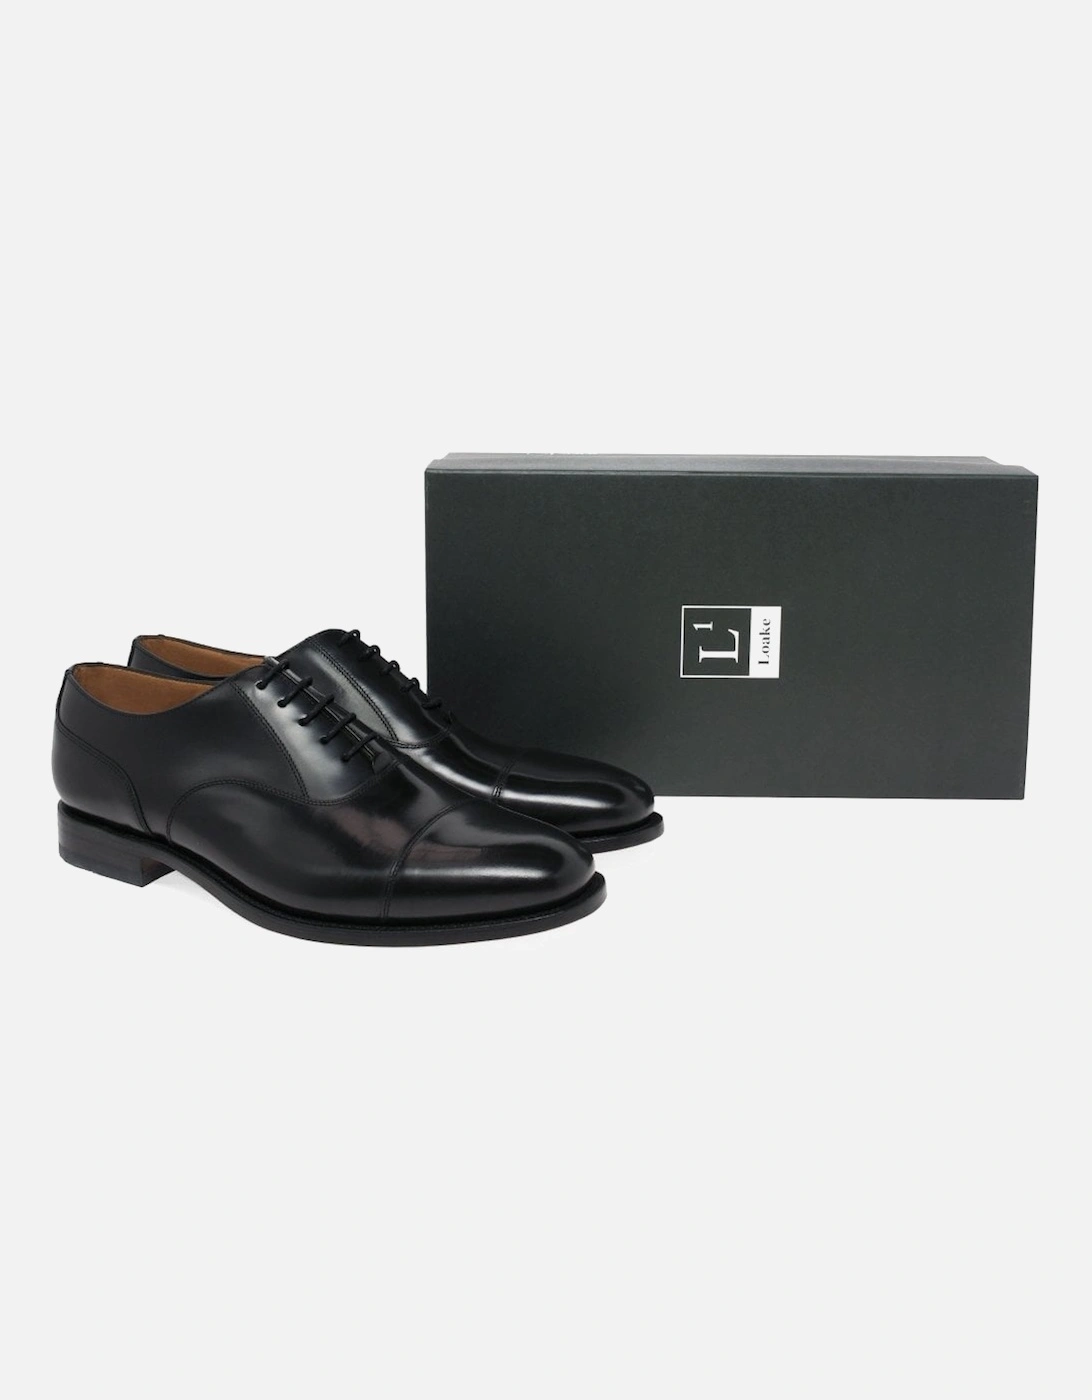 200B Mens Formal Capped Oxford Shoes